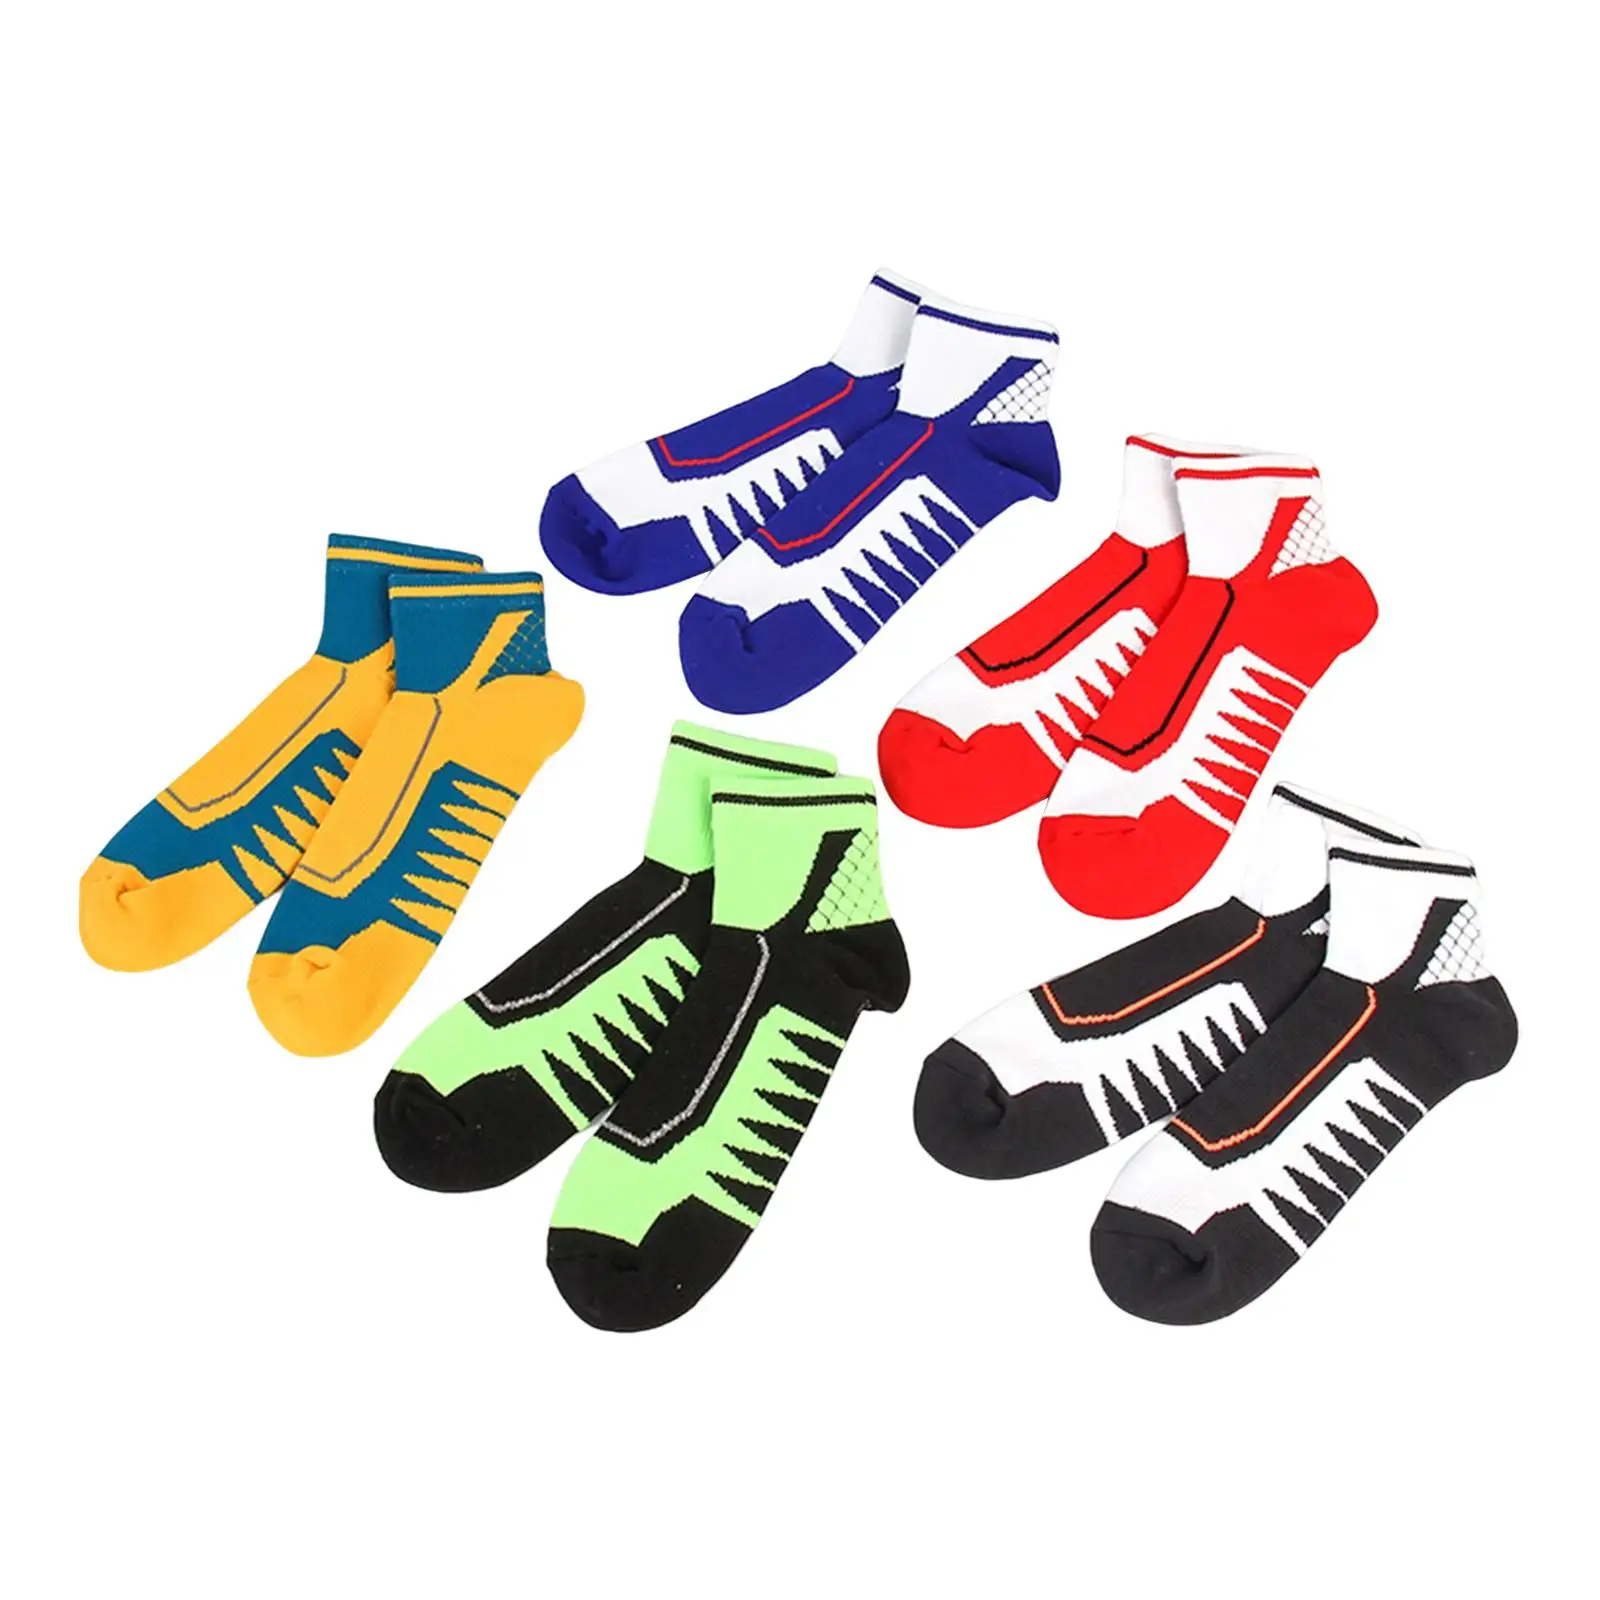 Thicker Athletic Sports Ankle Socks Breathable Absorb Sweat 5 Pairs Men Crew Socks for New Year Bedroom Party Living Room Hiking